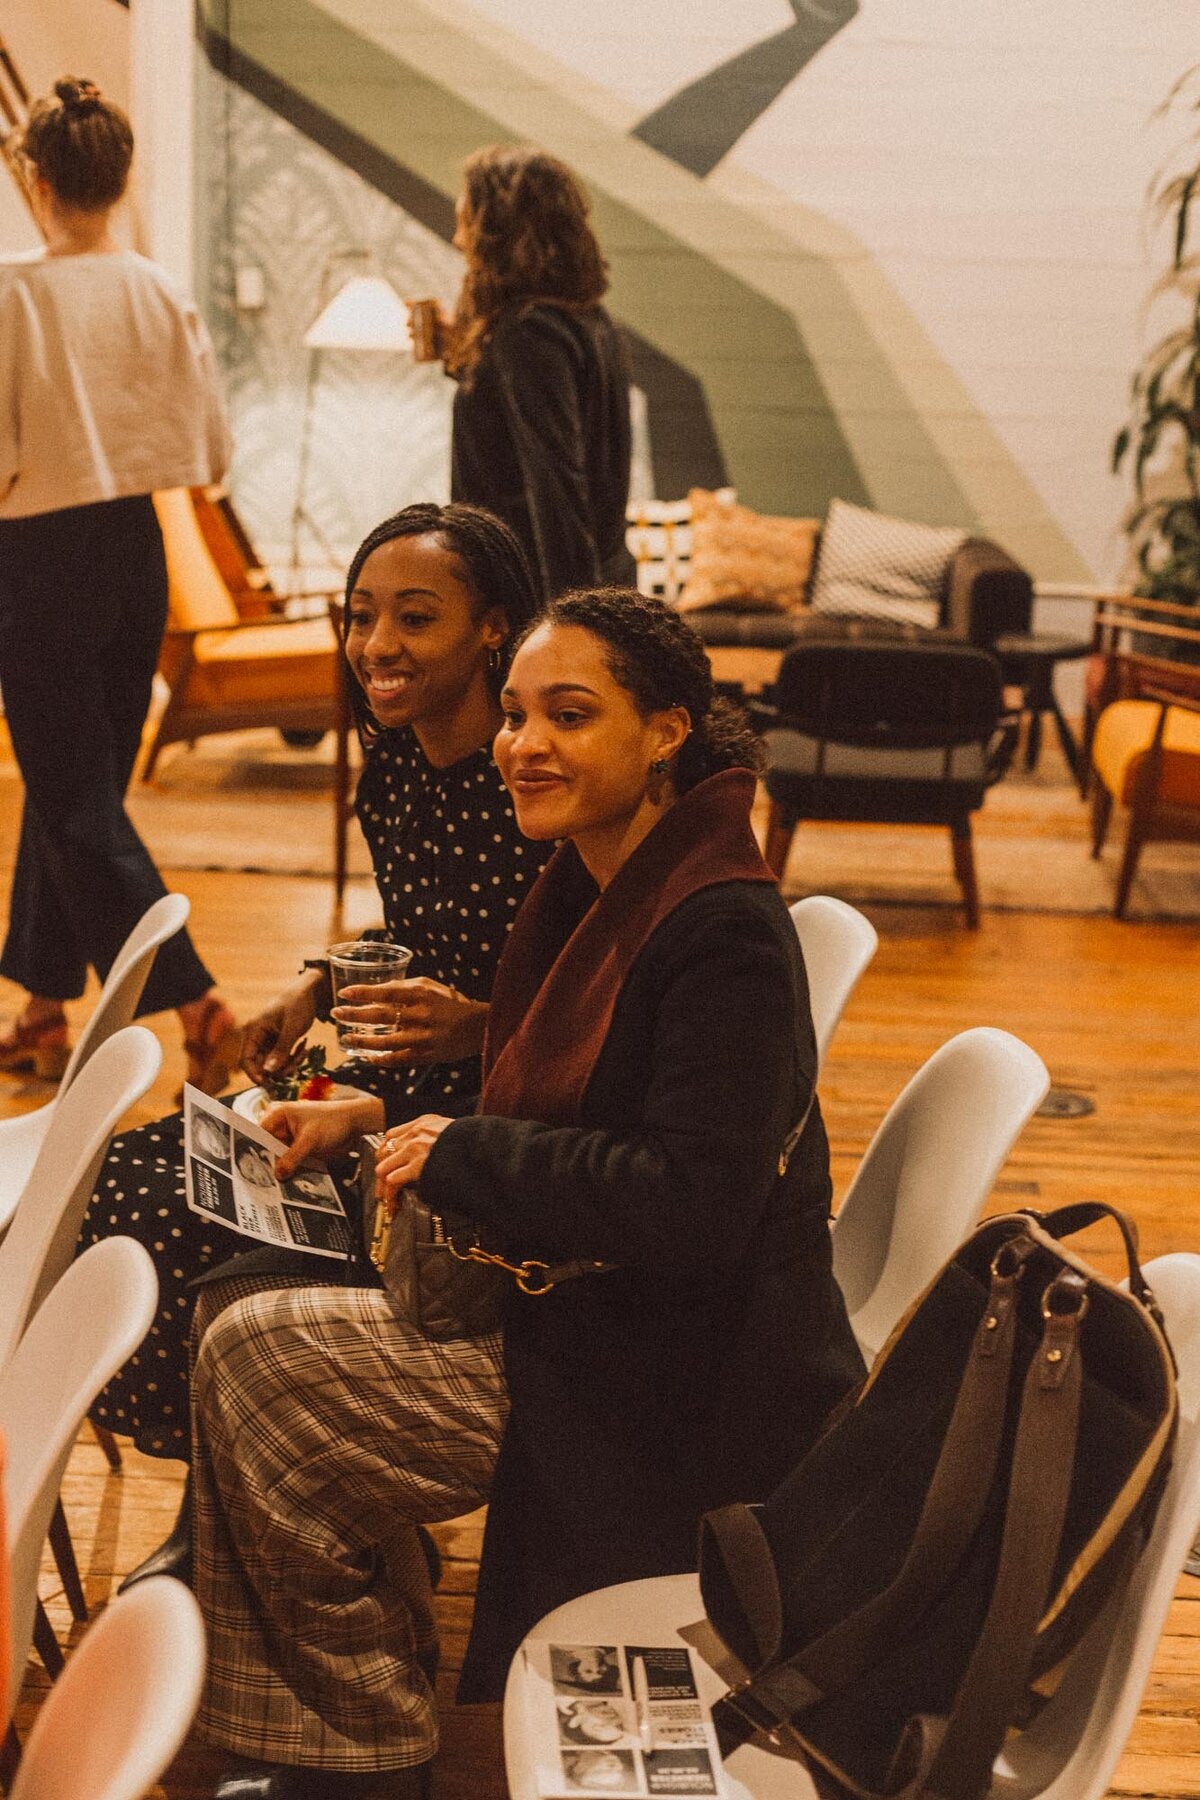 Two participants at a Black Her Stories event are posing and taking a picture together